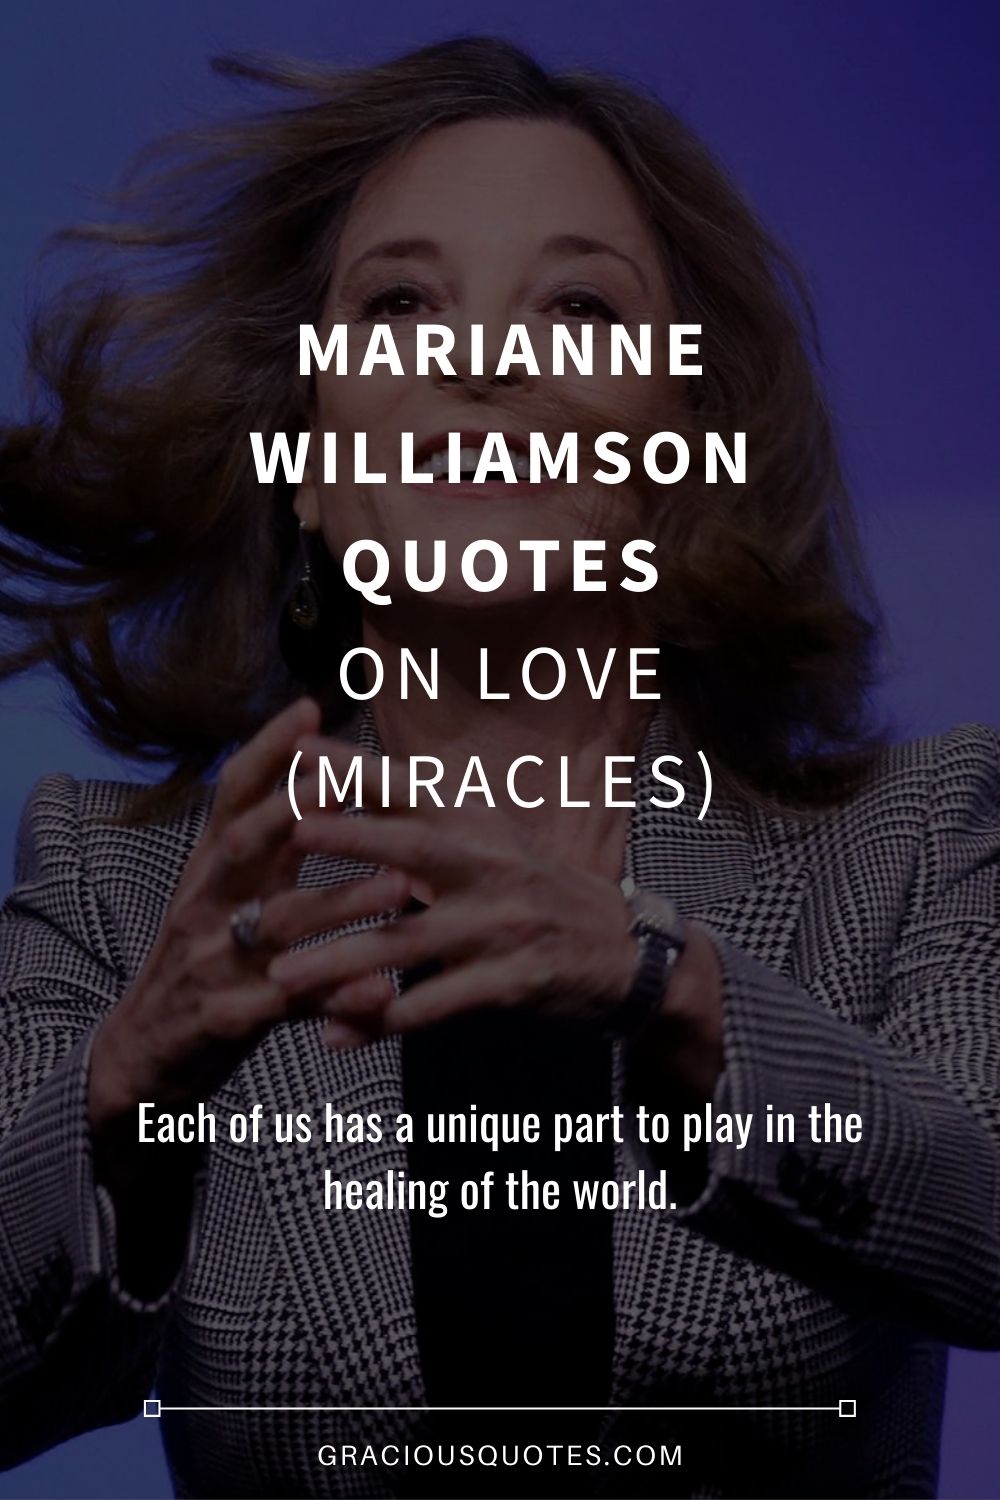 Marianne Williamson Quotes on Love (MIRACLES) - Gracious Quotes